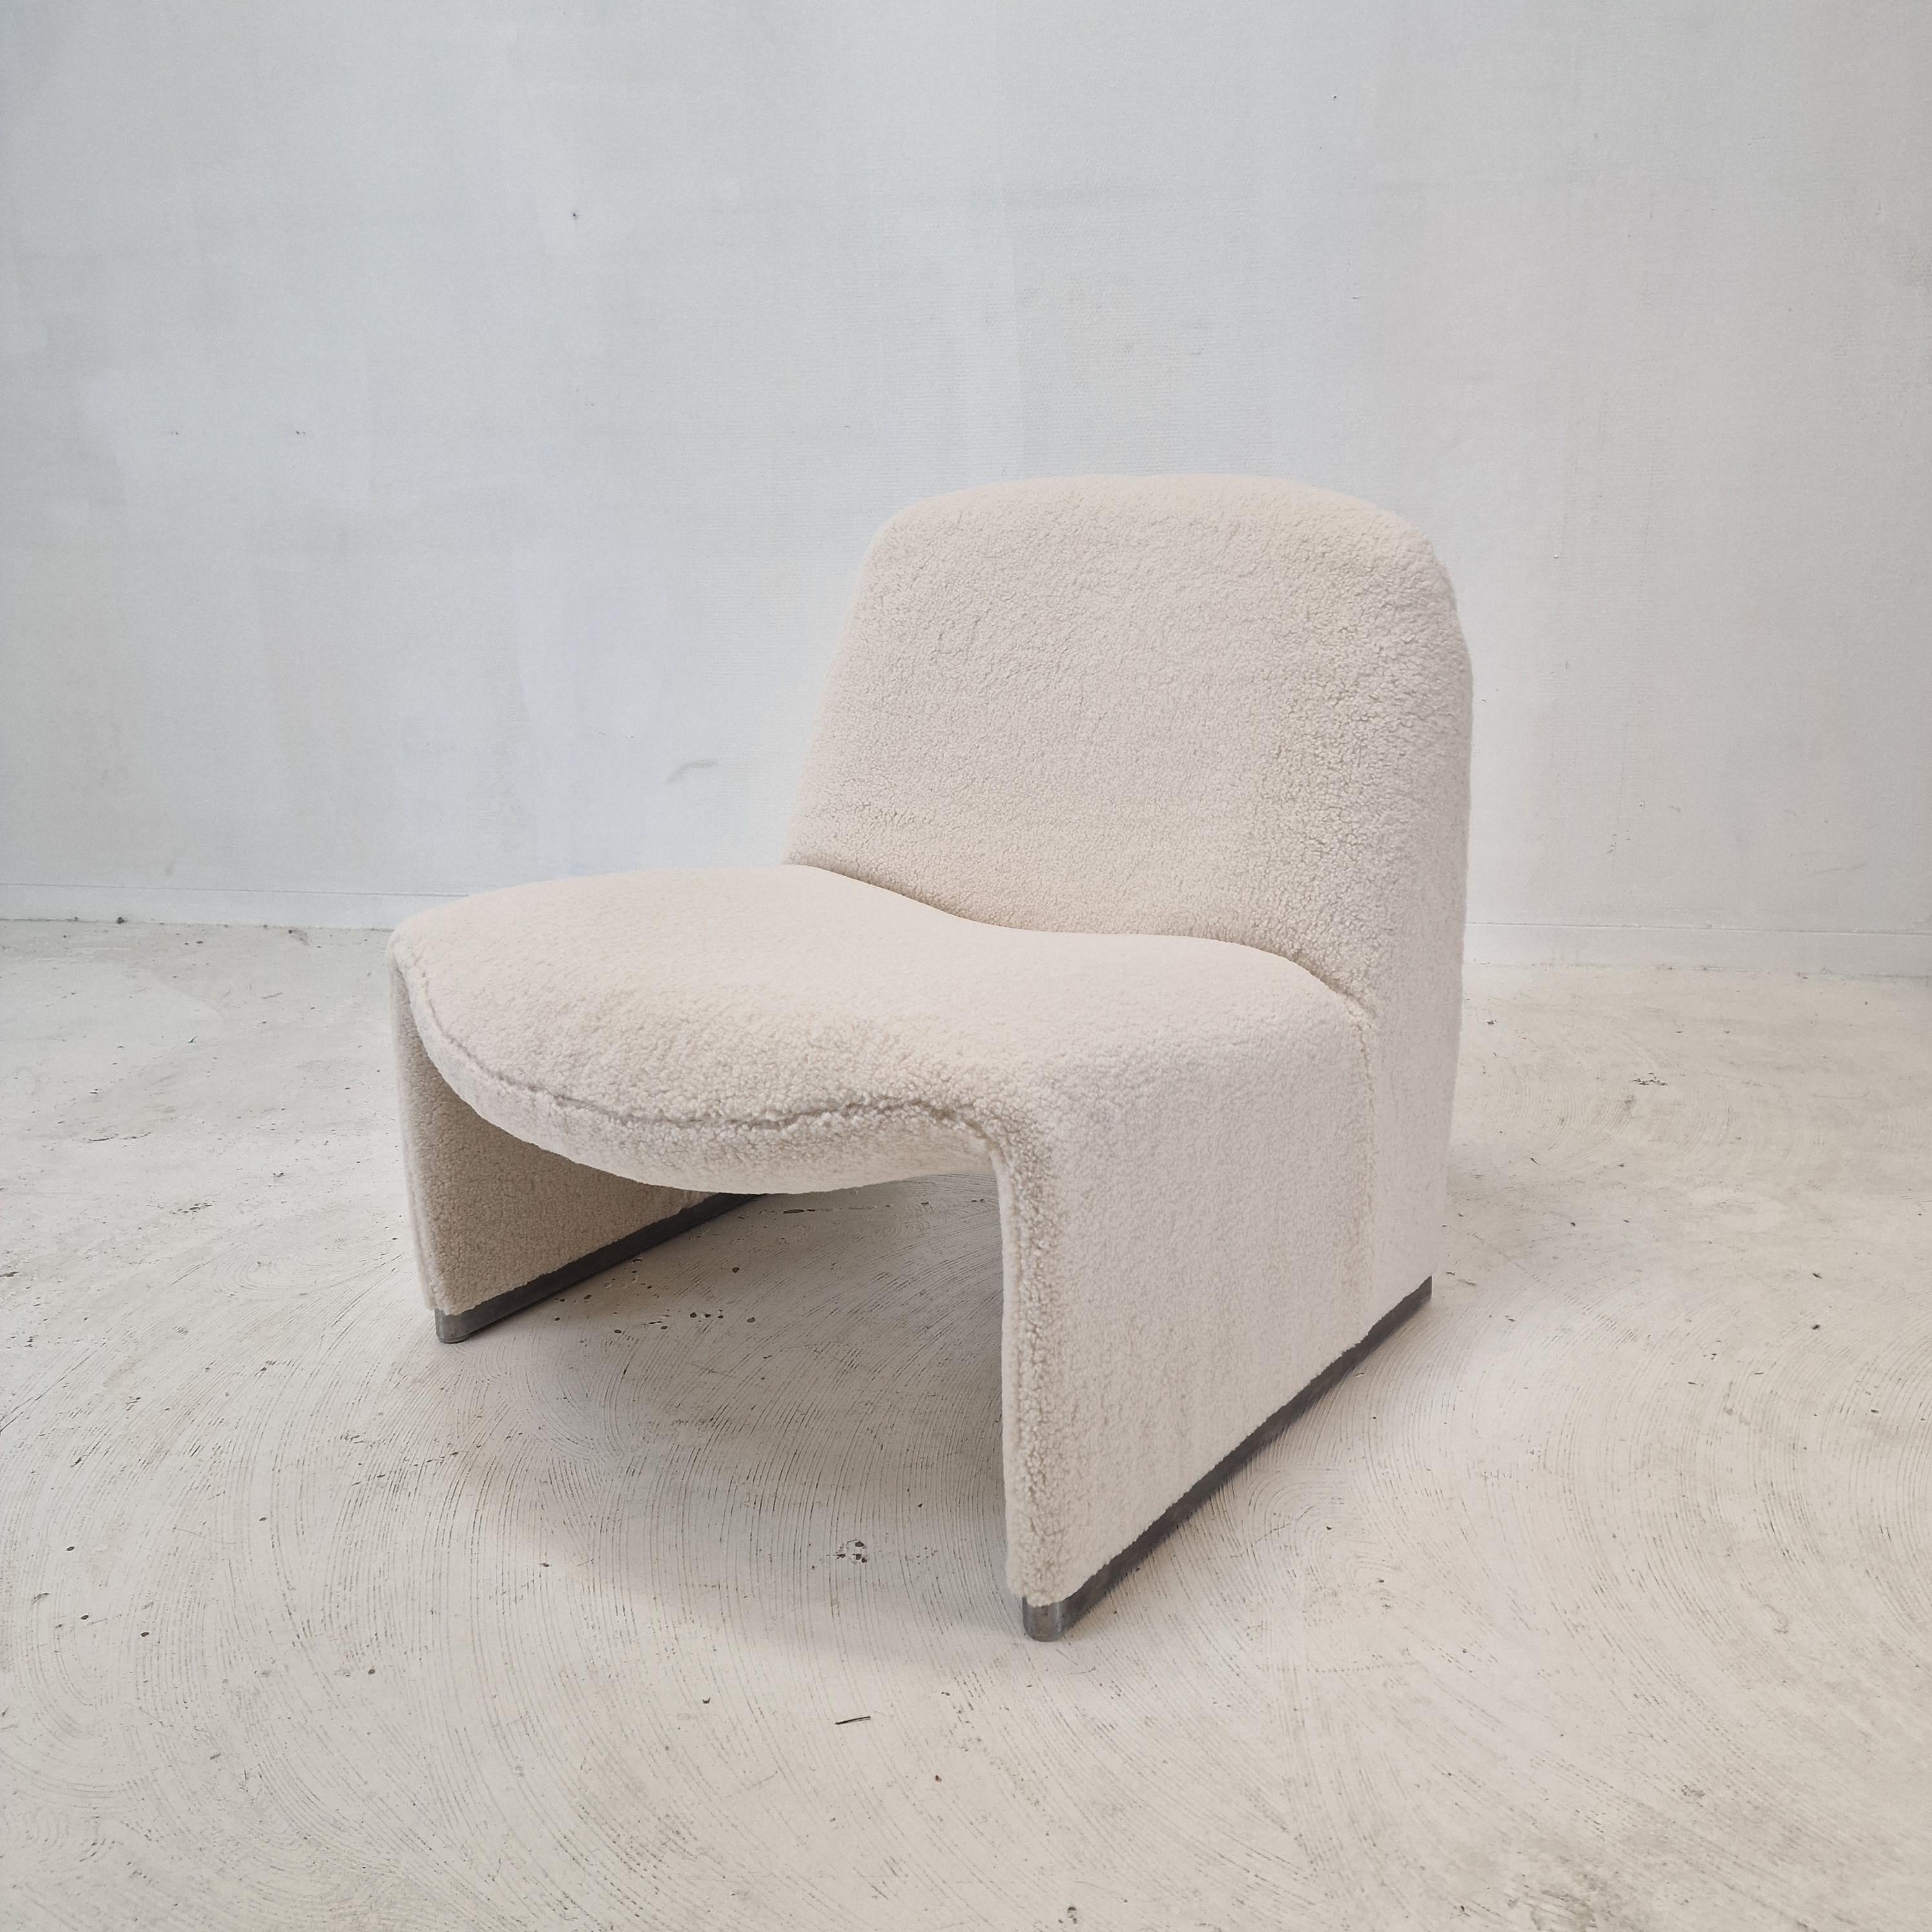 Set of 2 lovely and comfortable Alky chairs. 
Designed by Giancarlo Piretti in 1969, produced by Artifort. 

They are just reupholstered with very soft and cosy fabric, it feels like a sheep. 
The chairs are in perfect condition.

We work with